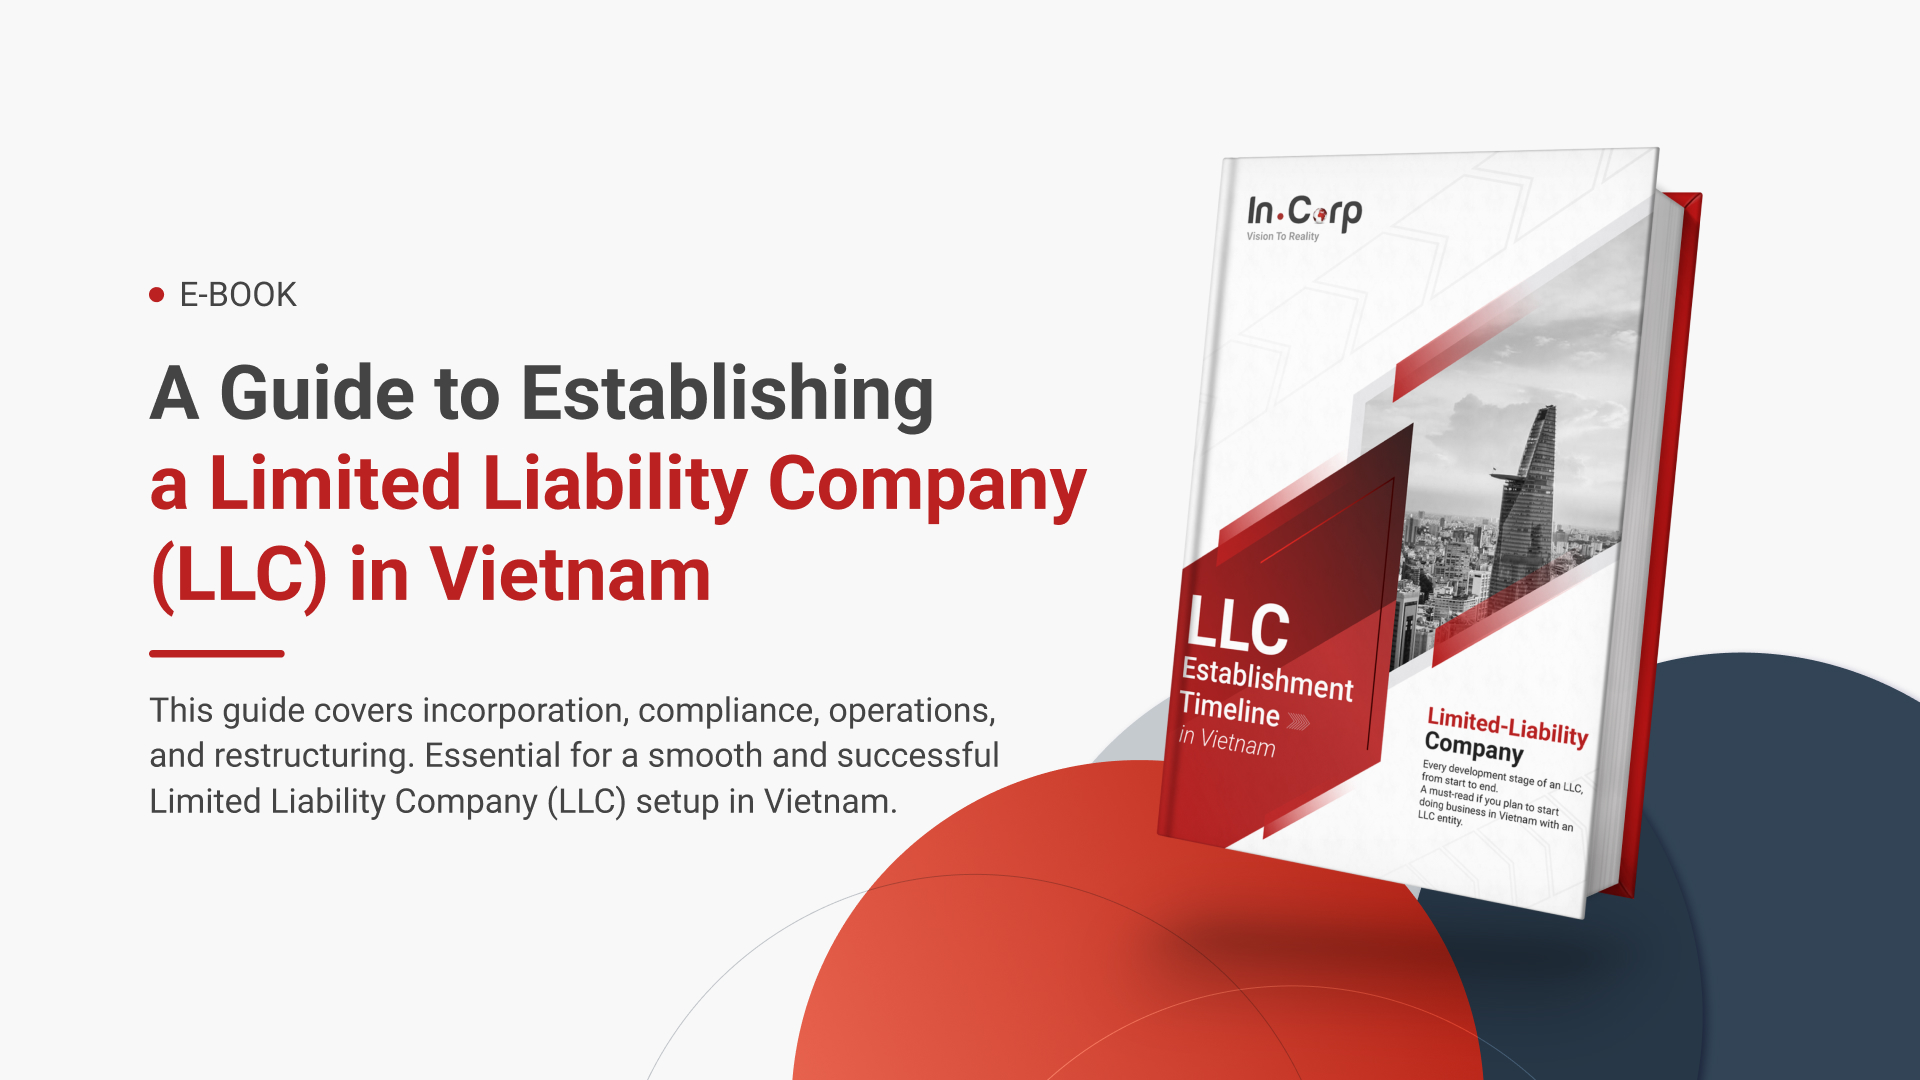 Limited Liability Company (LLC) Establishment Timeline for Foreign Investors in Vietnam